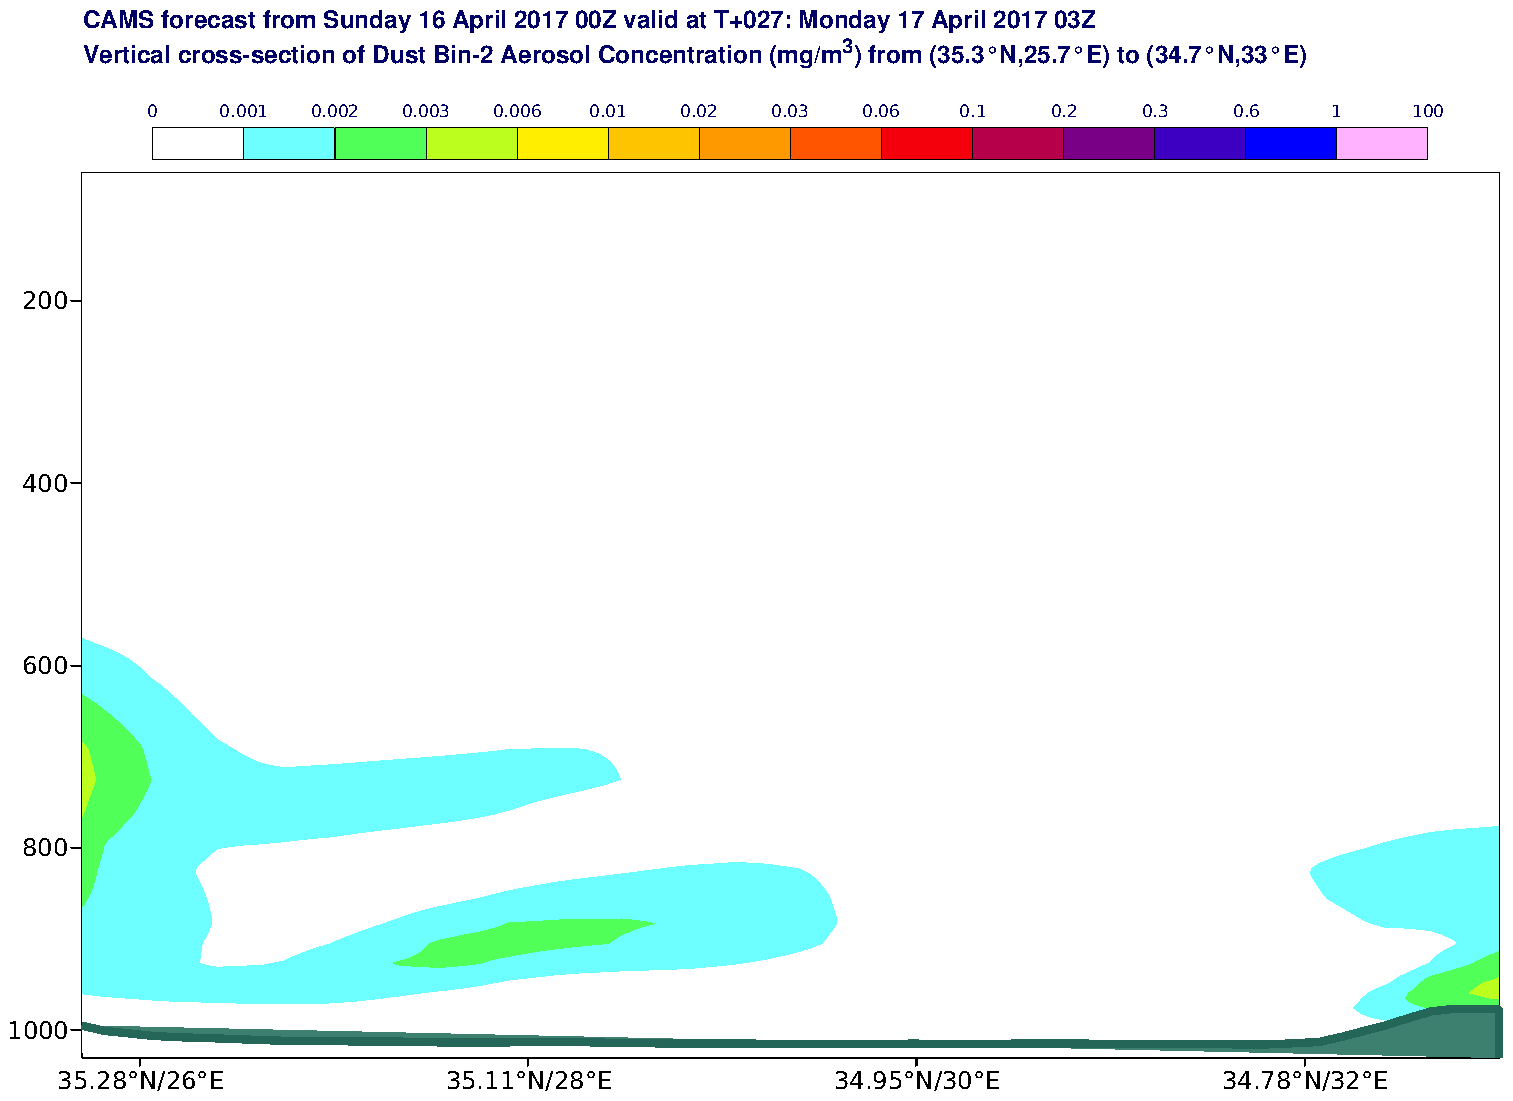 Vertical cross-section of Dust Bin-2 Aerosol Concentration (mg/m3) valid at T27 - 2017-04-17 03:00